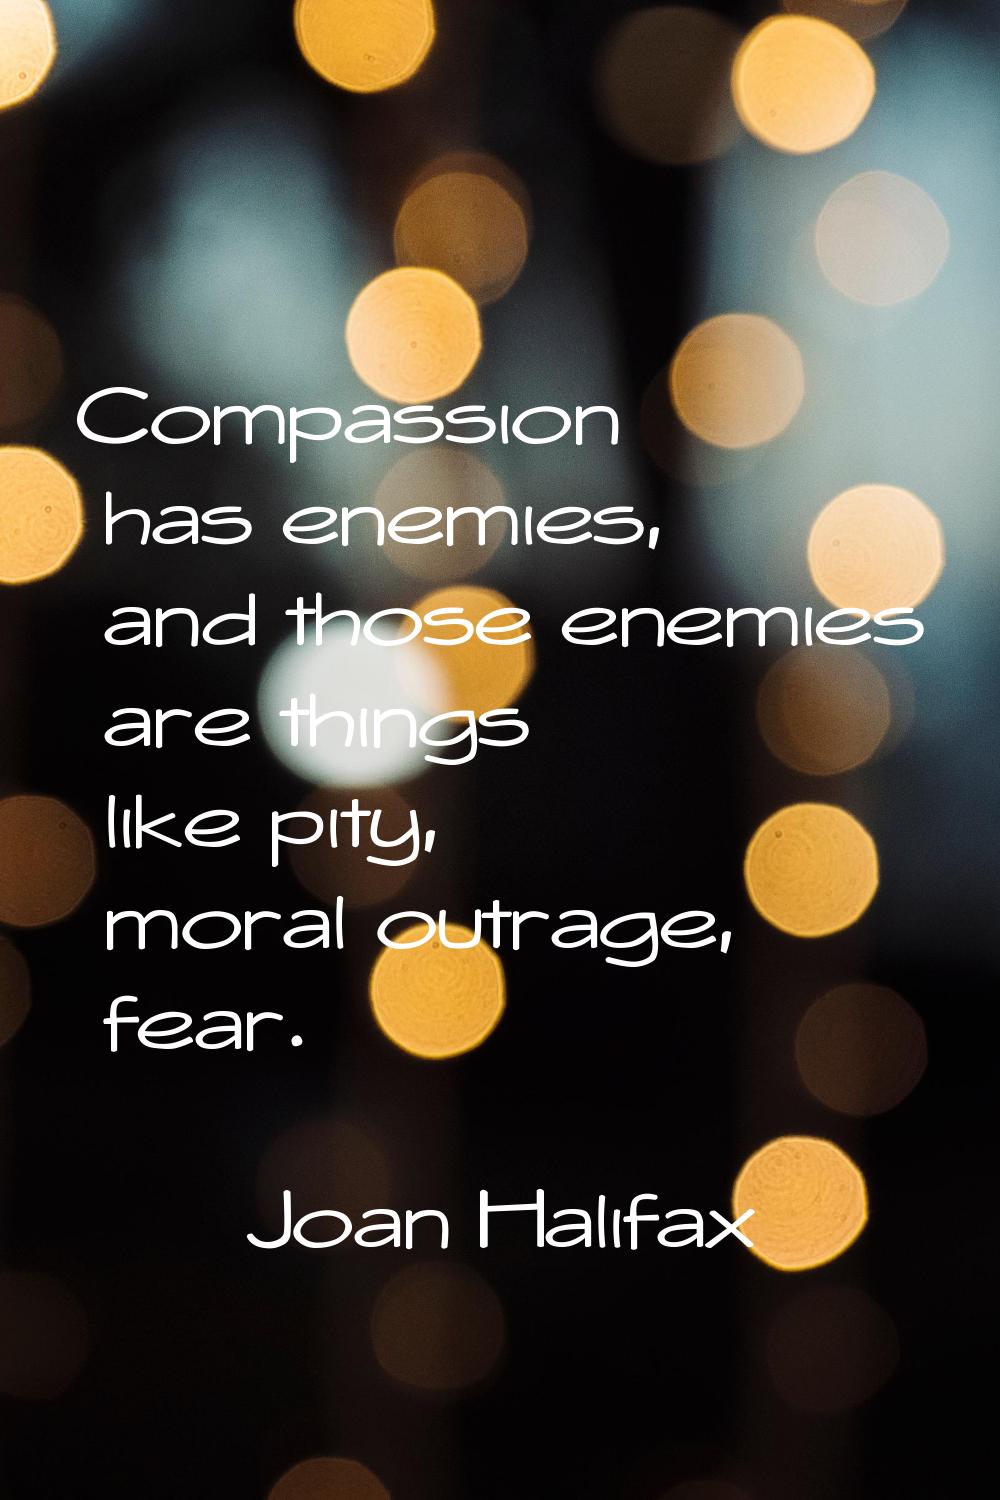 Compassion has enemies, and those enemies are things like pity, moral outrage, fear.